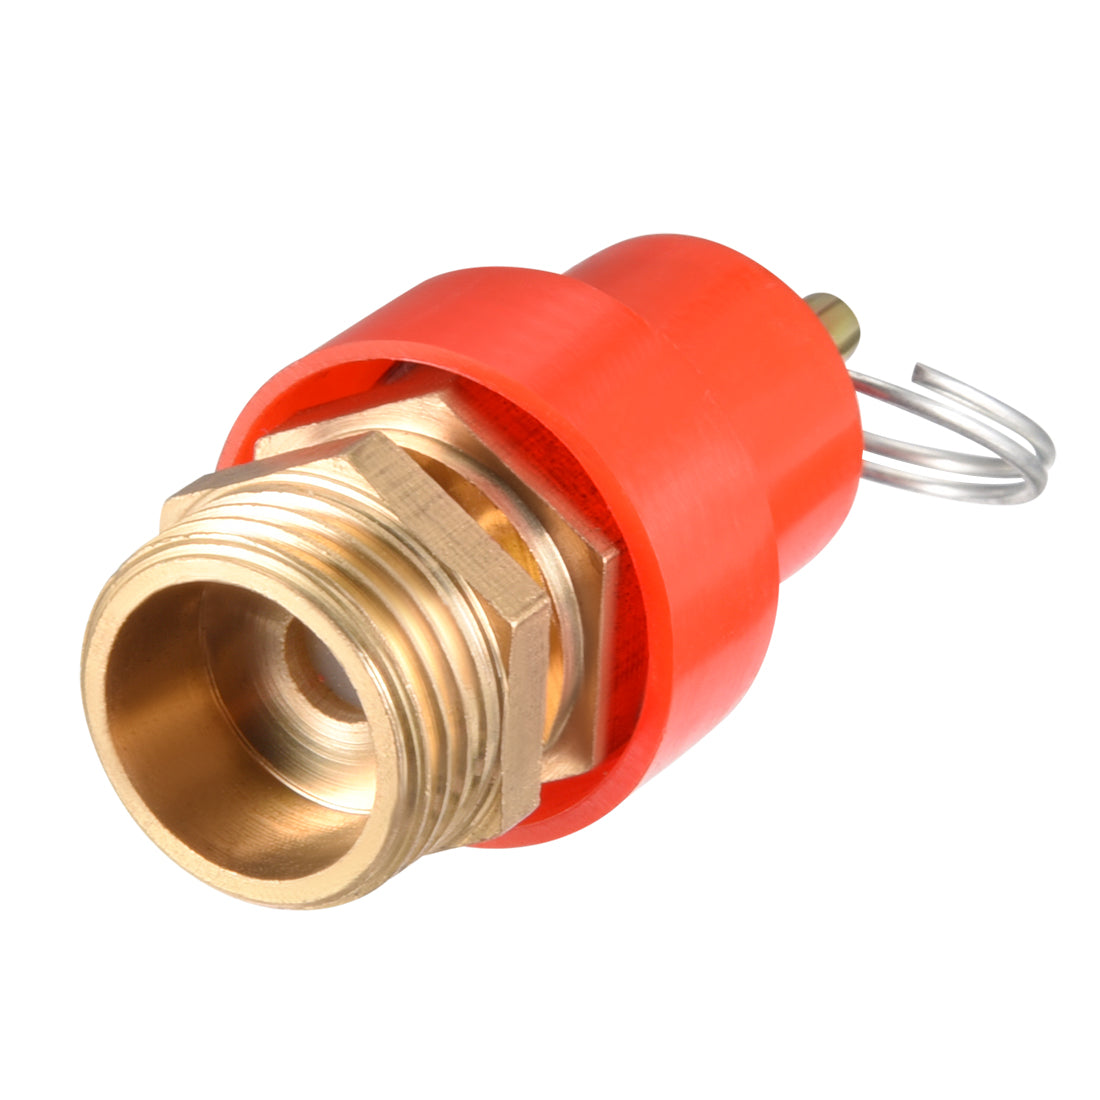 uxcell Uxcell Air Compressor Fittings Pressure Relief Valve 1/2PT Thread 0.78Mpa Red